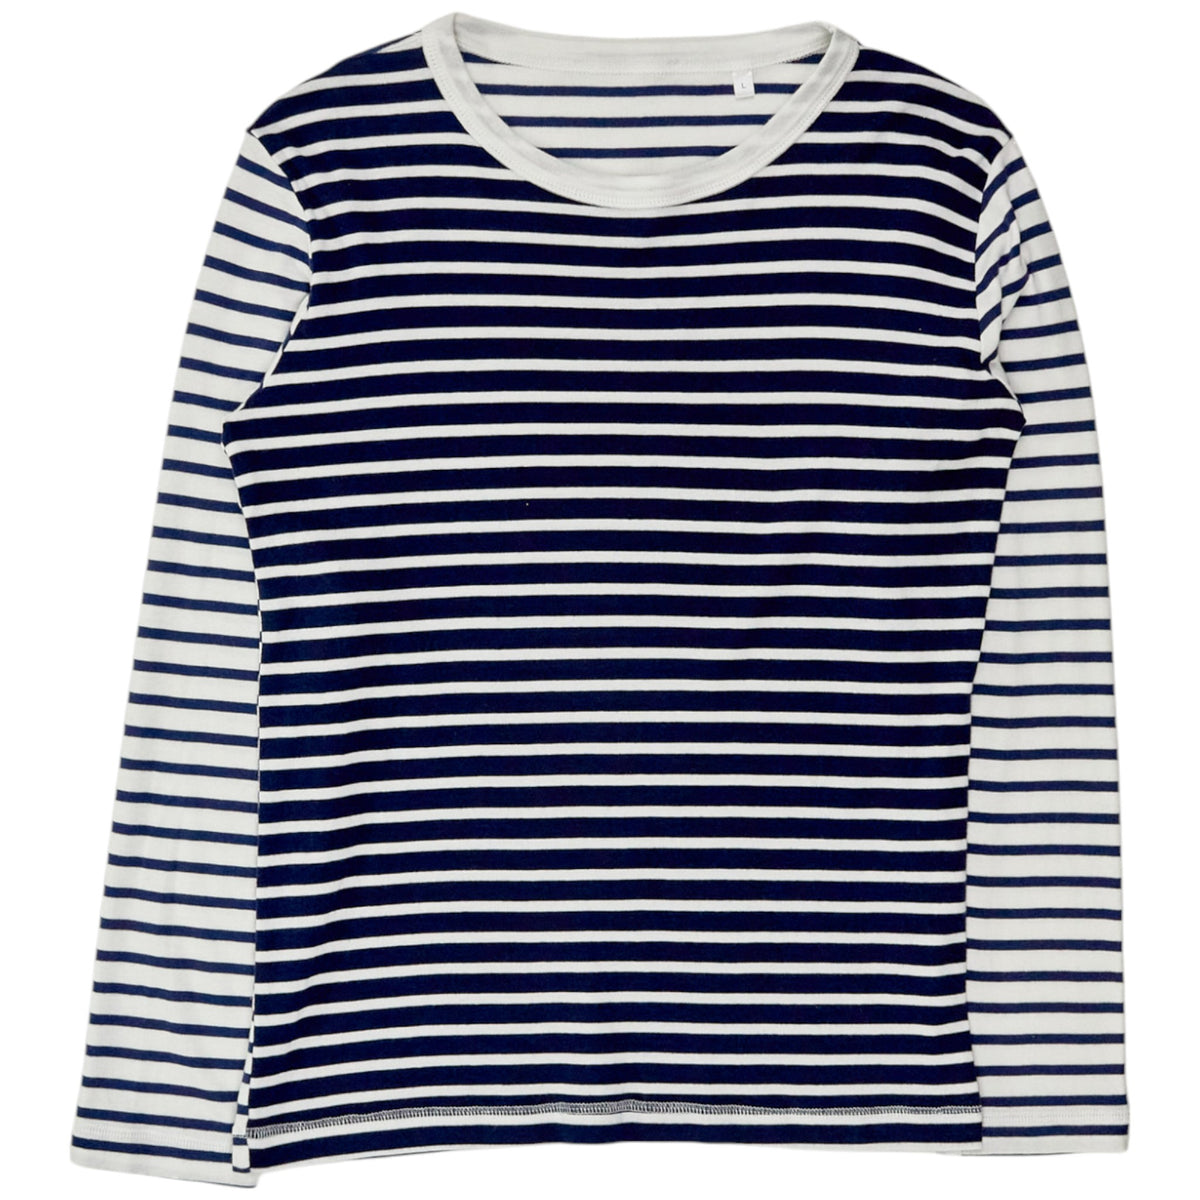 NRBY Navy/White Striped LS Tee